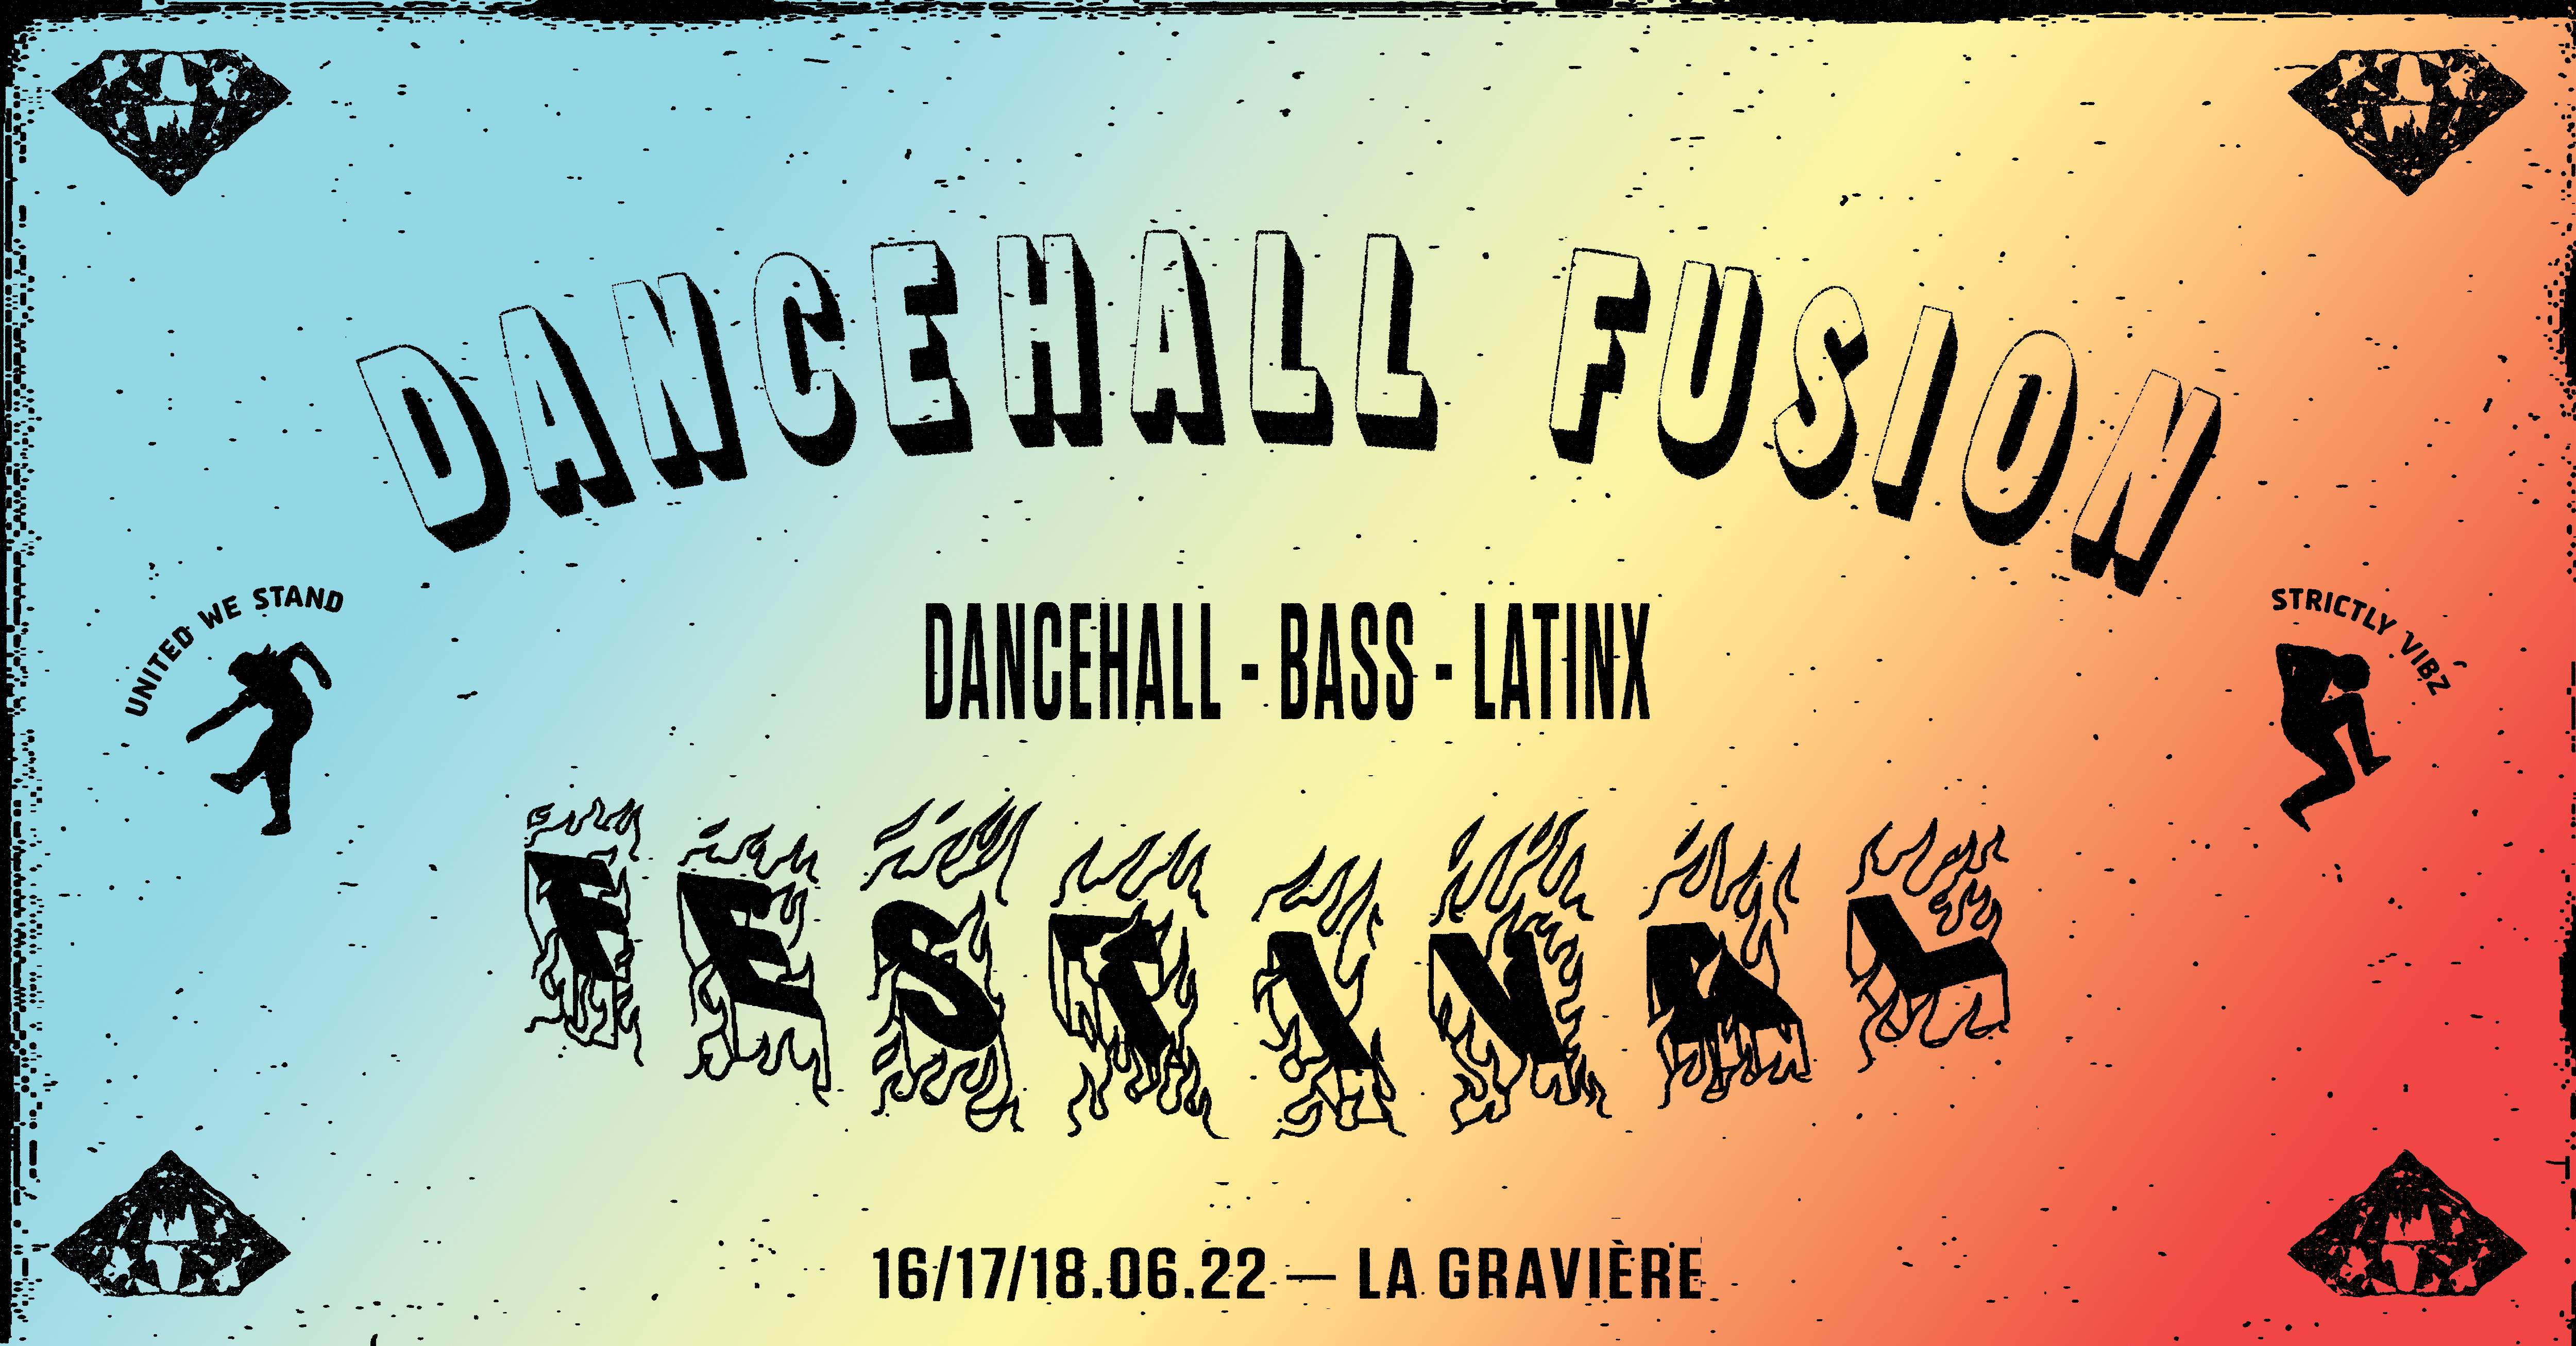 Dancehall Fusion Festival - Day 3 with Equiknoxx:Gavsborg, Time Cow, Shanique Marie - King Doud - Página frontal